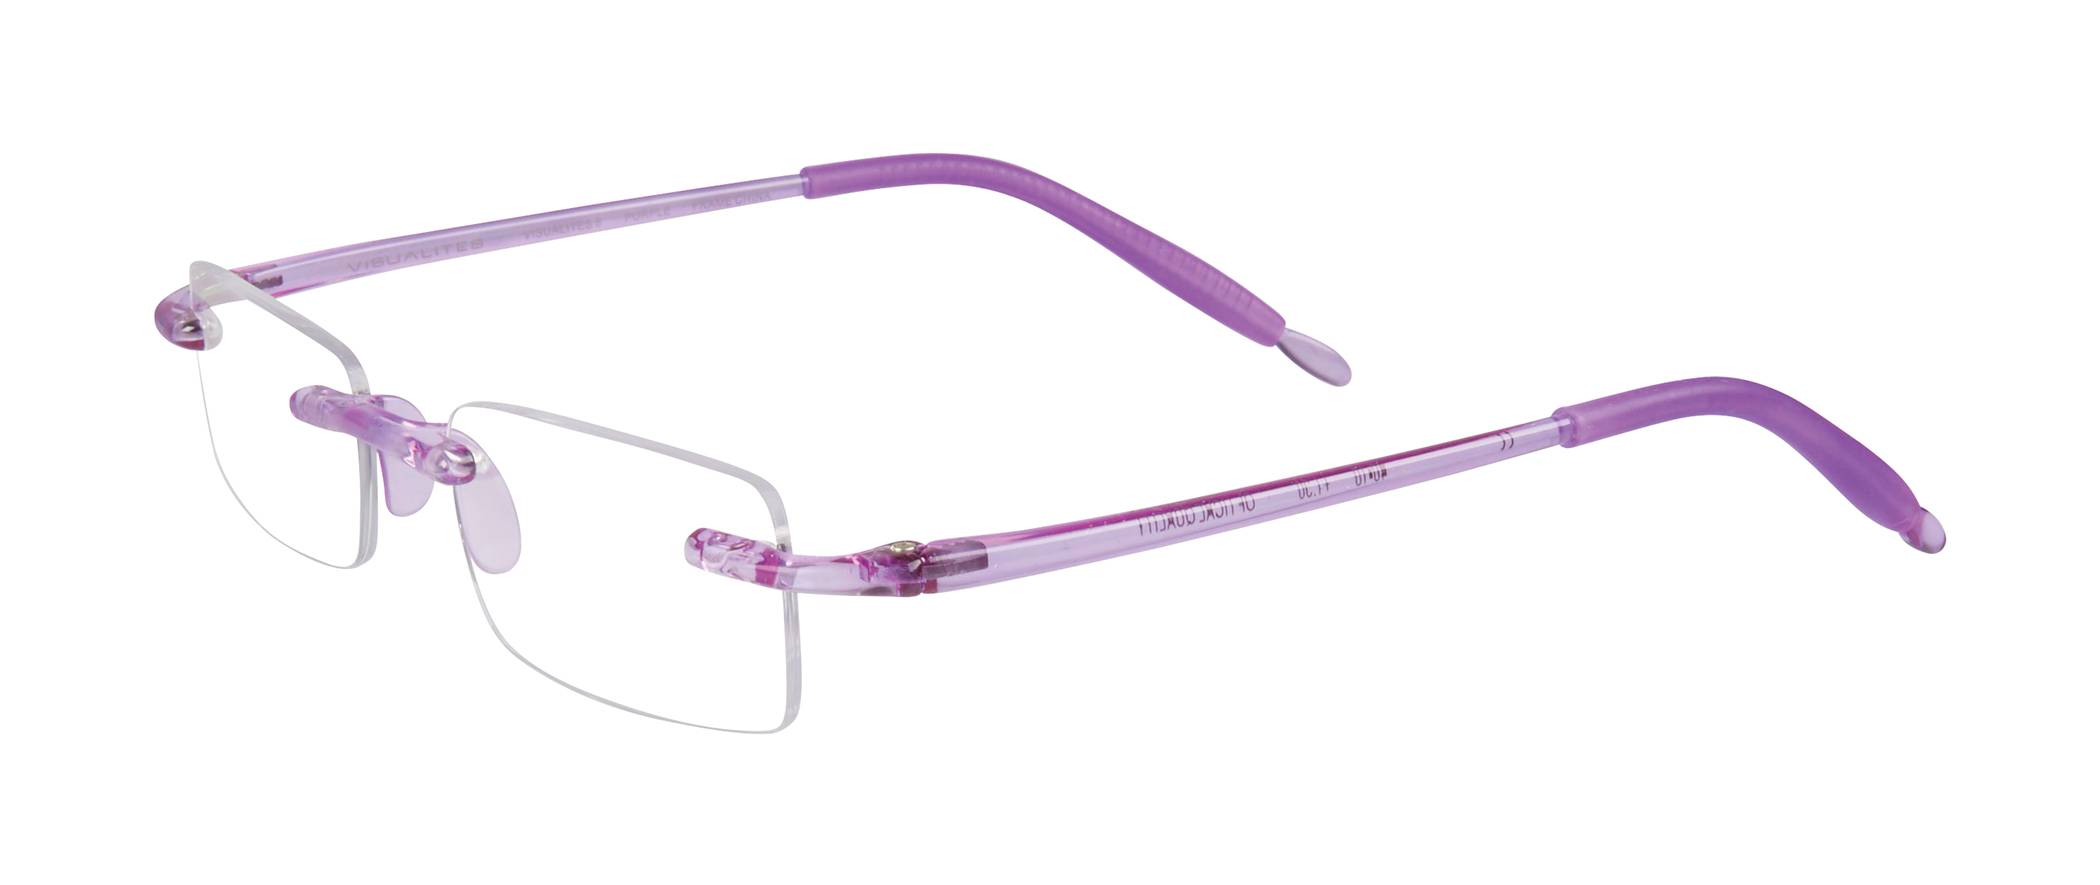 Shop For The Most Durable Reading Glasses